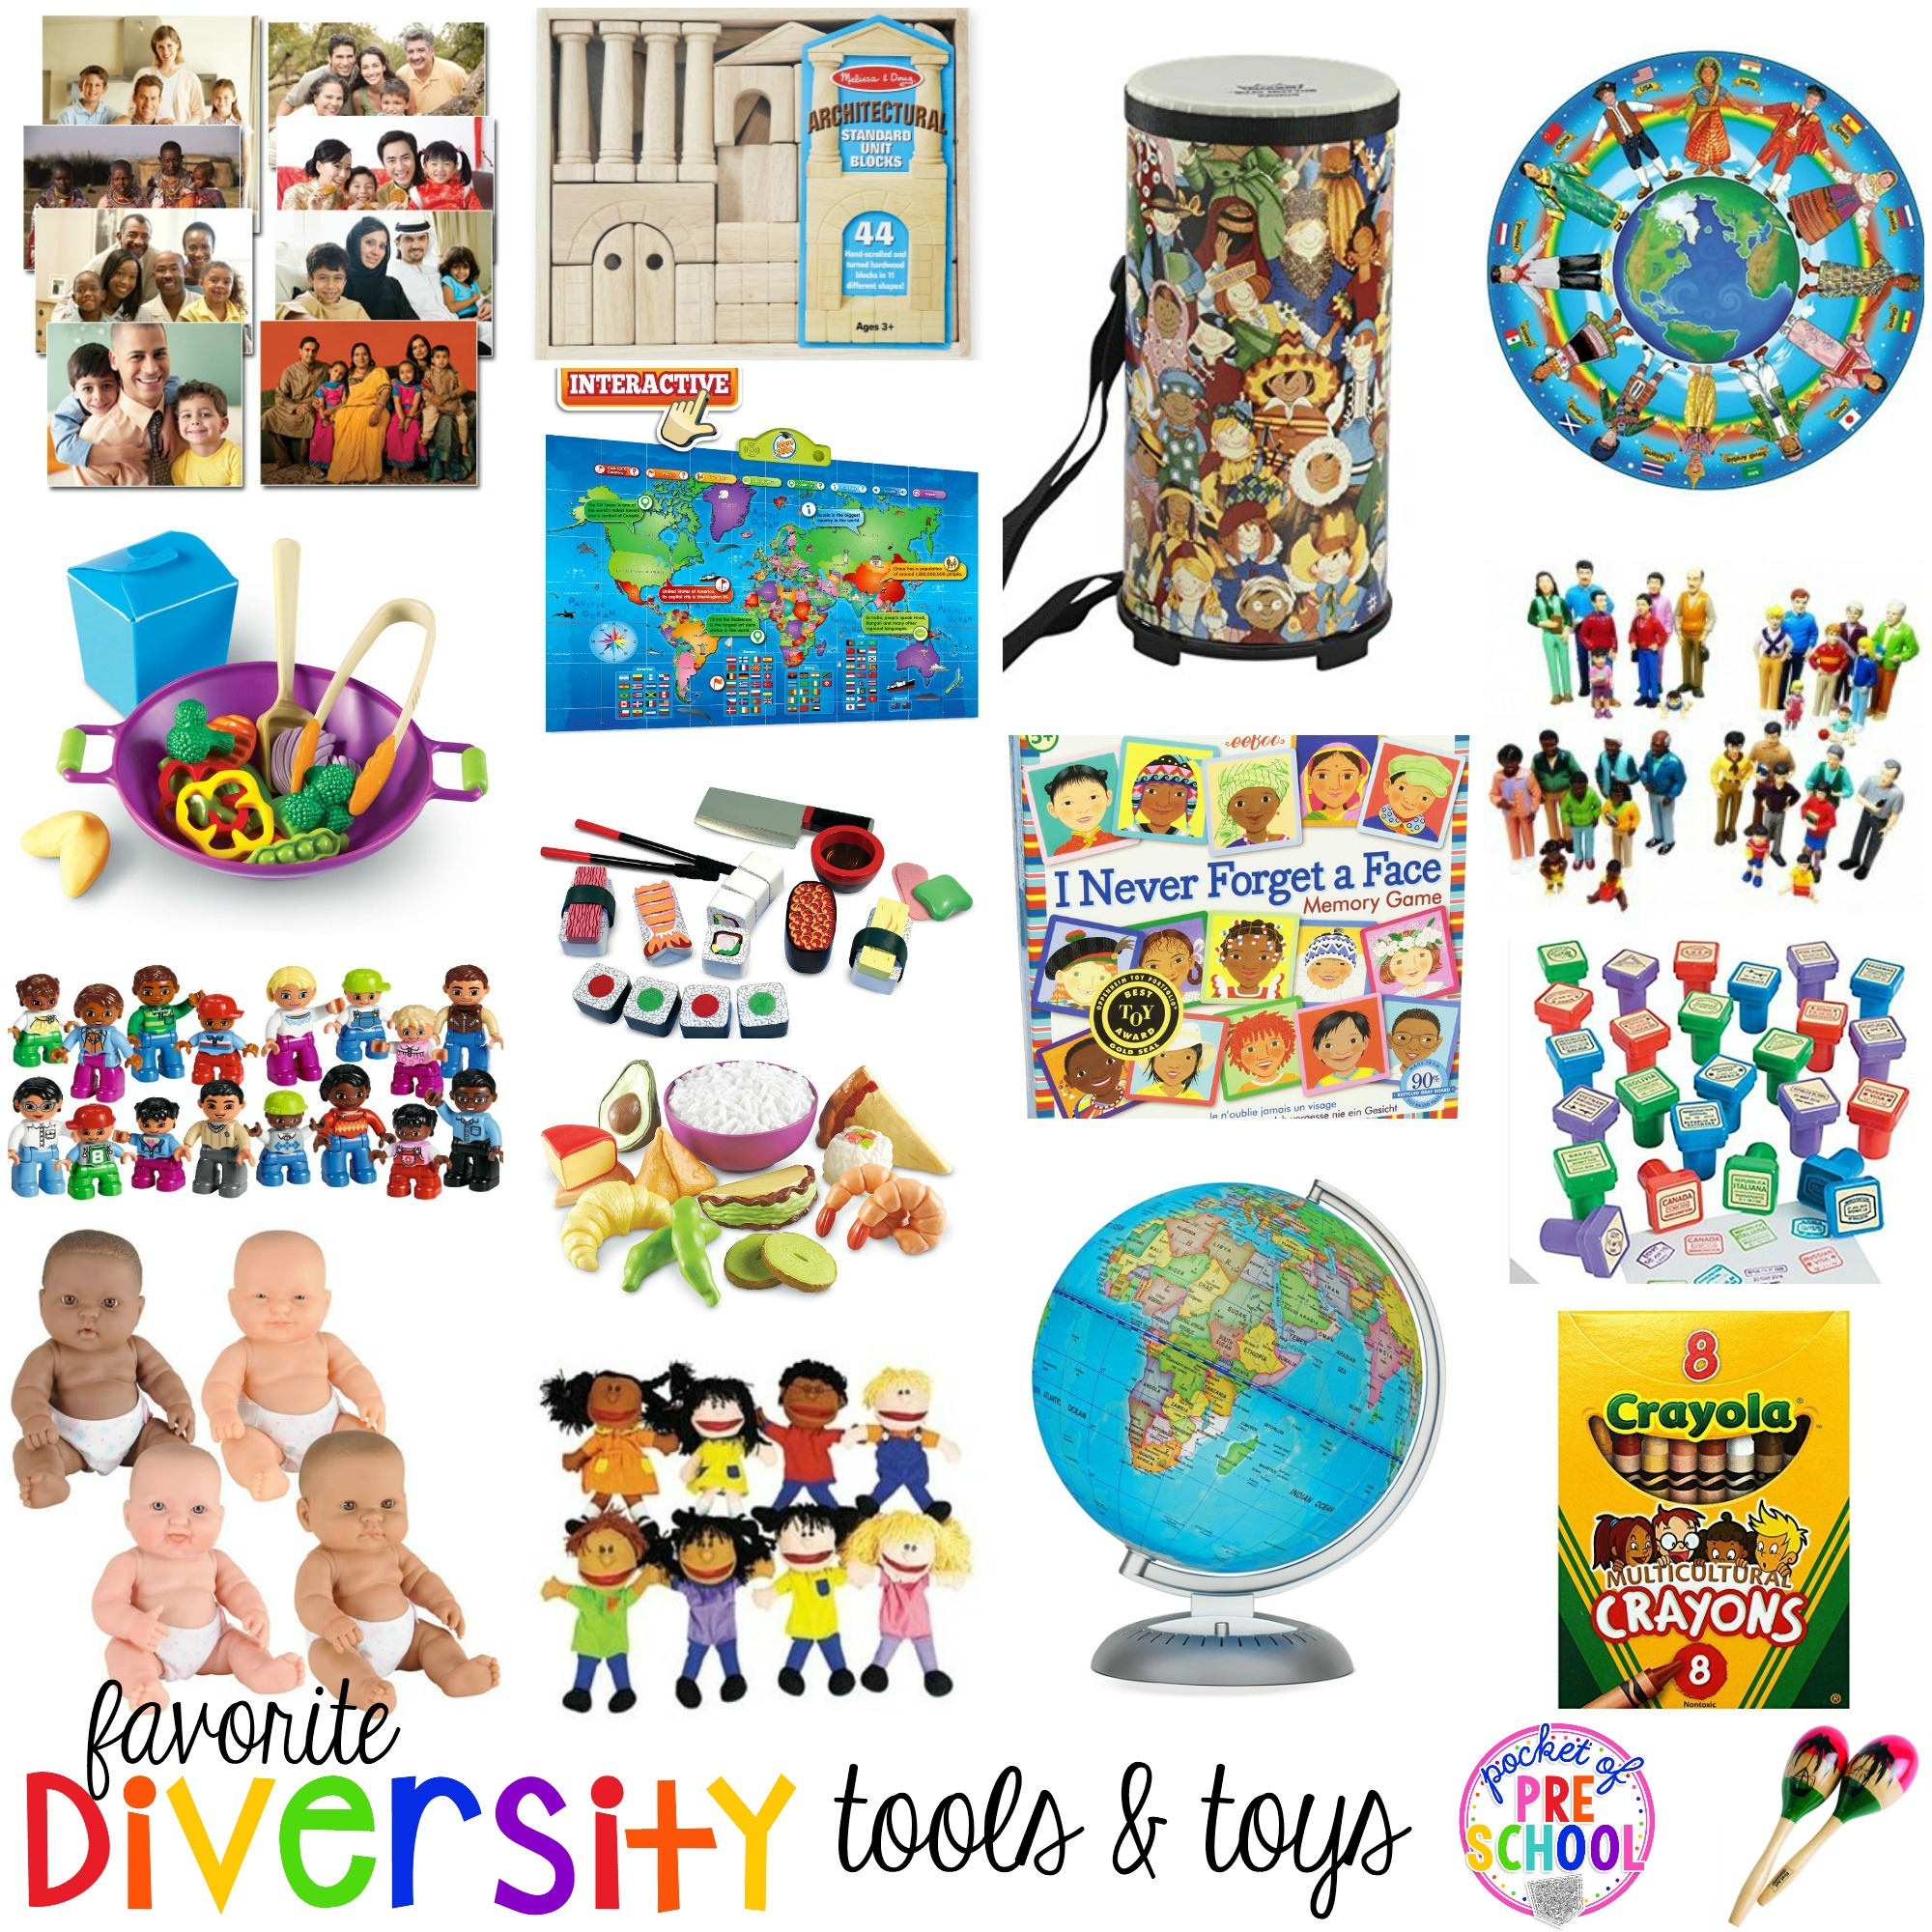 Daycare clipart diverse. Favorite diversity tools toys